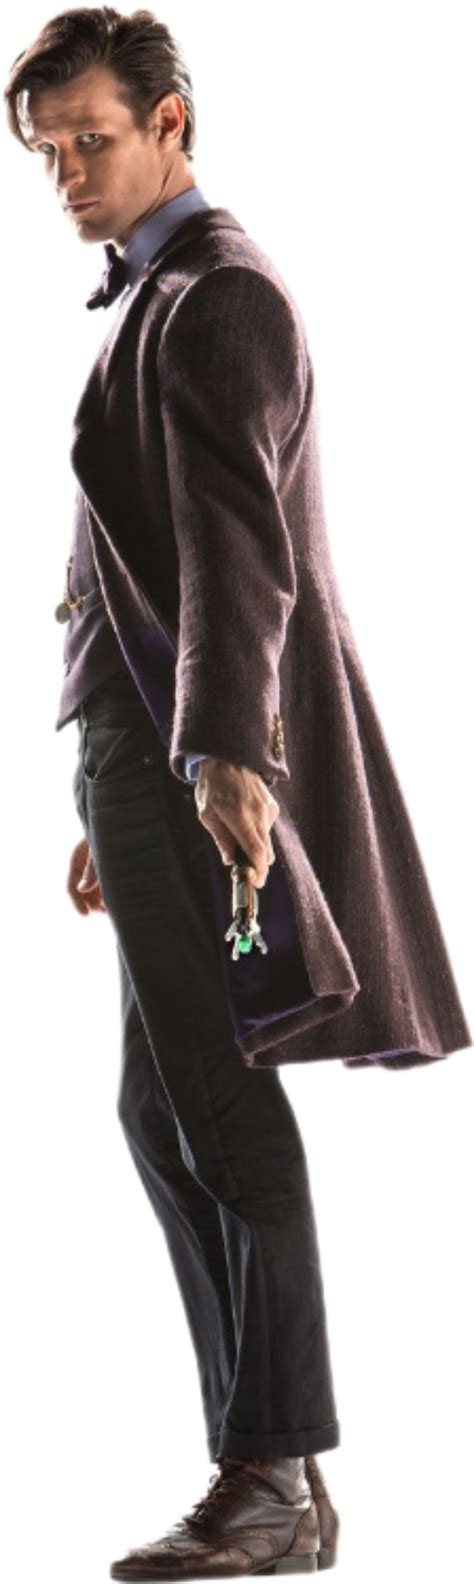 Eleventh Doctor 13 Png Doctor Who By Bats66 On Deviantart